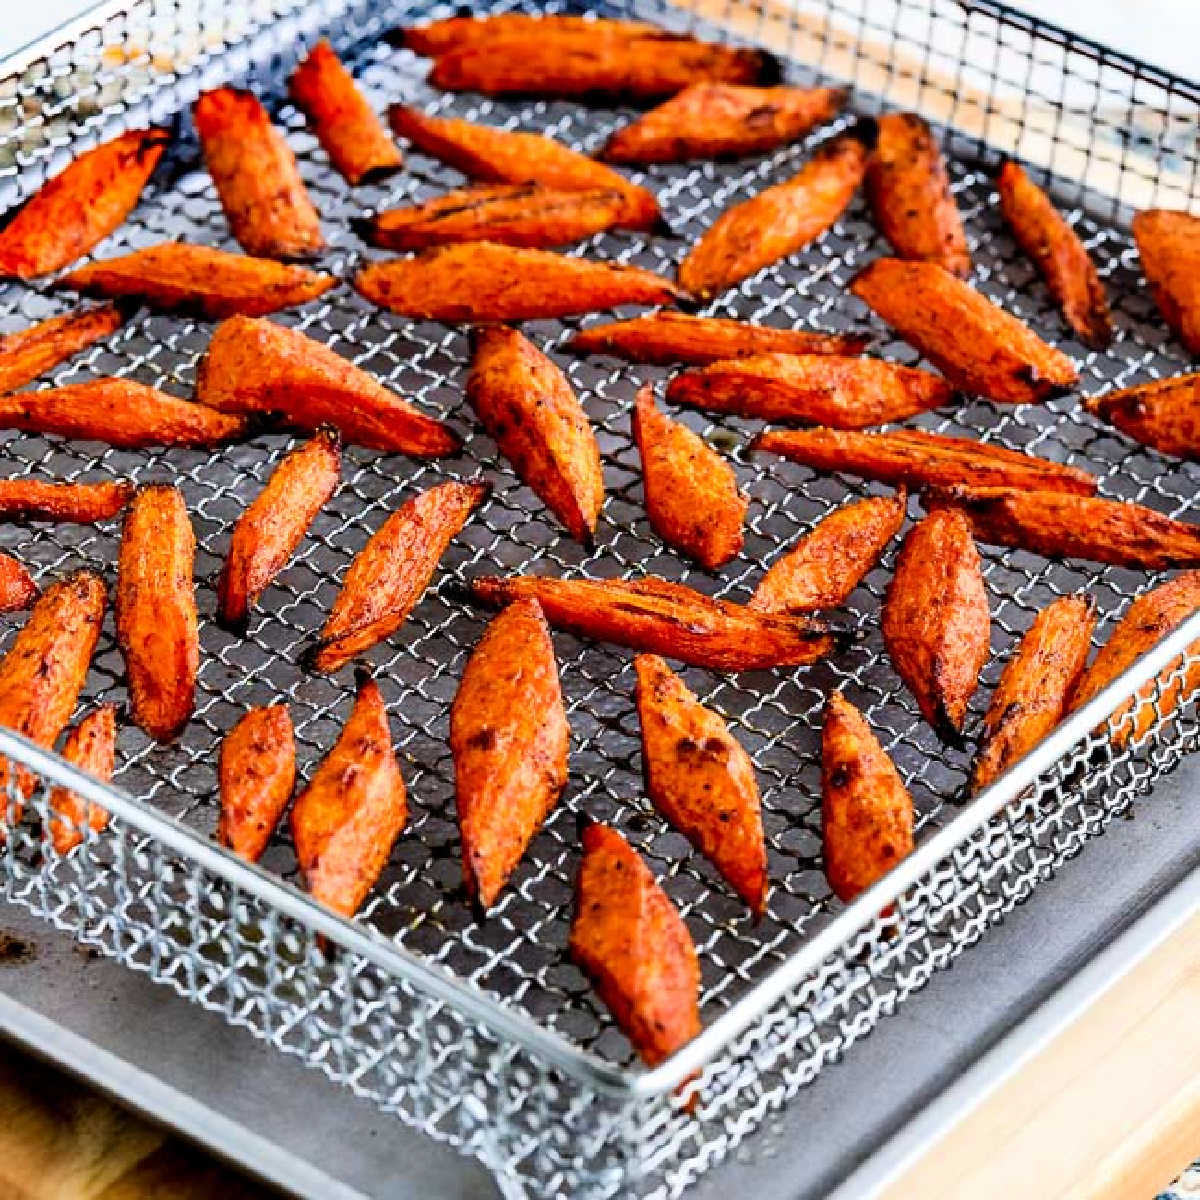 Square image of Air Fryer Carrots shown in basket of Air Fryer.